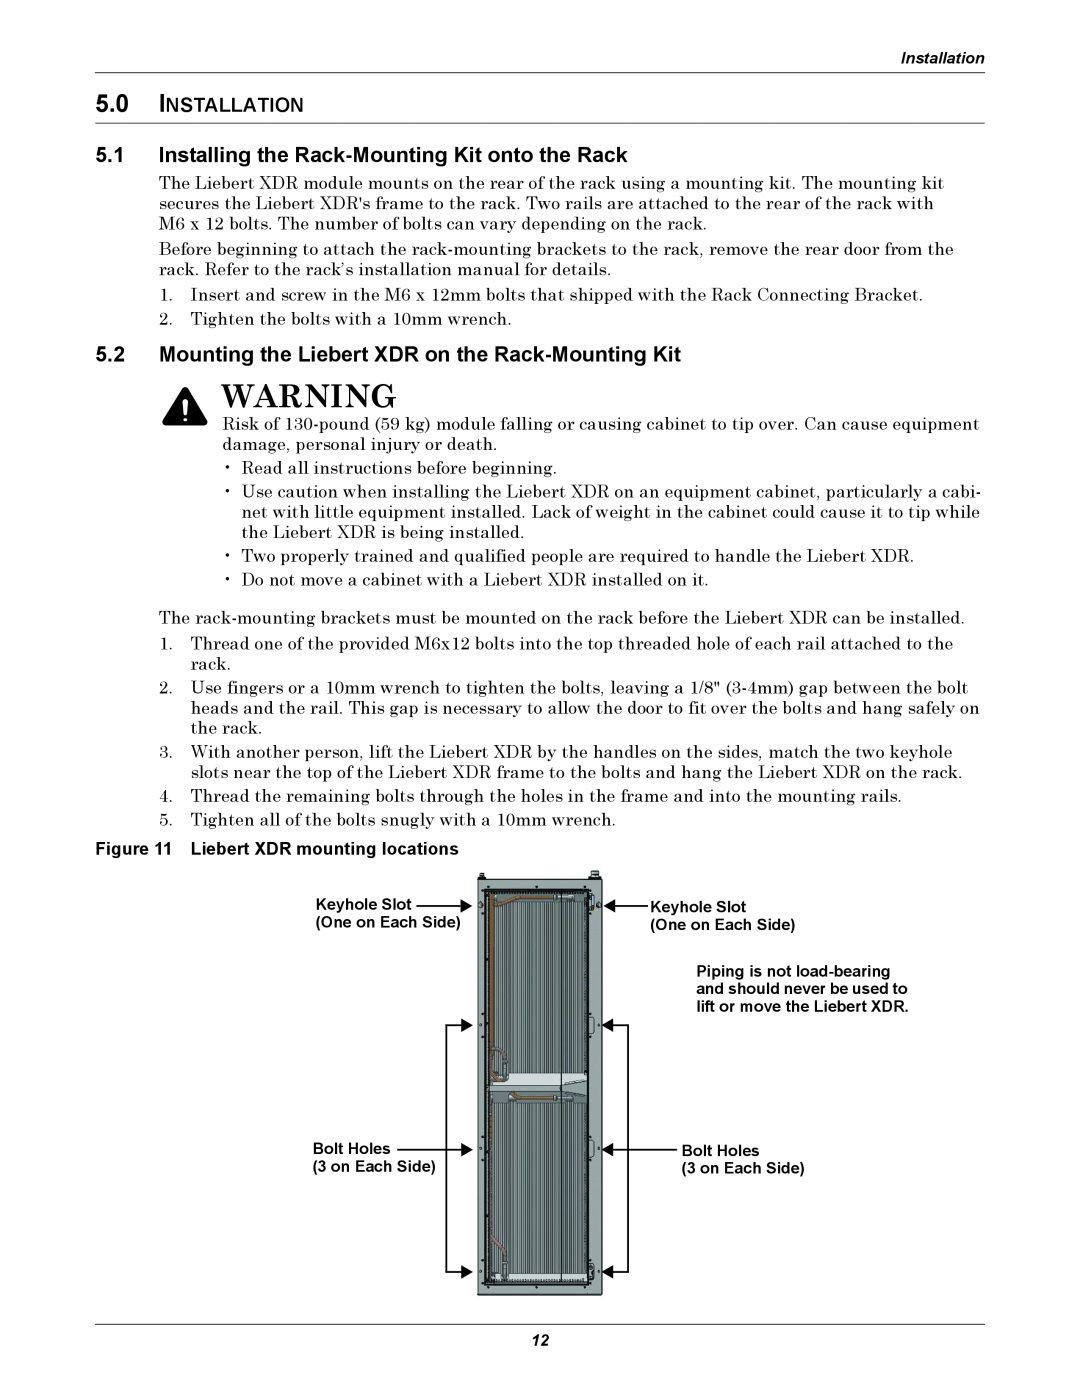 Emerson XDR user manual 5.1Installing the Rack-MountingKit onto the Rack, 5.0INSTALLATION 